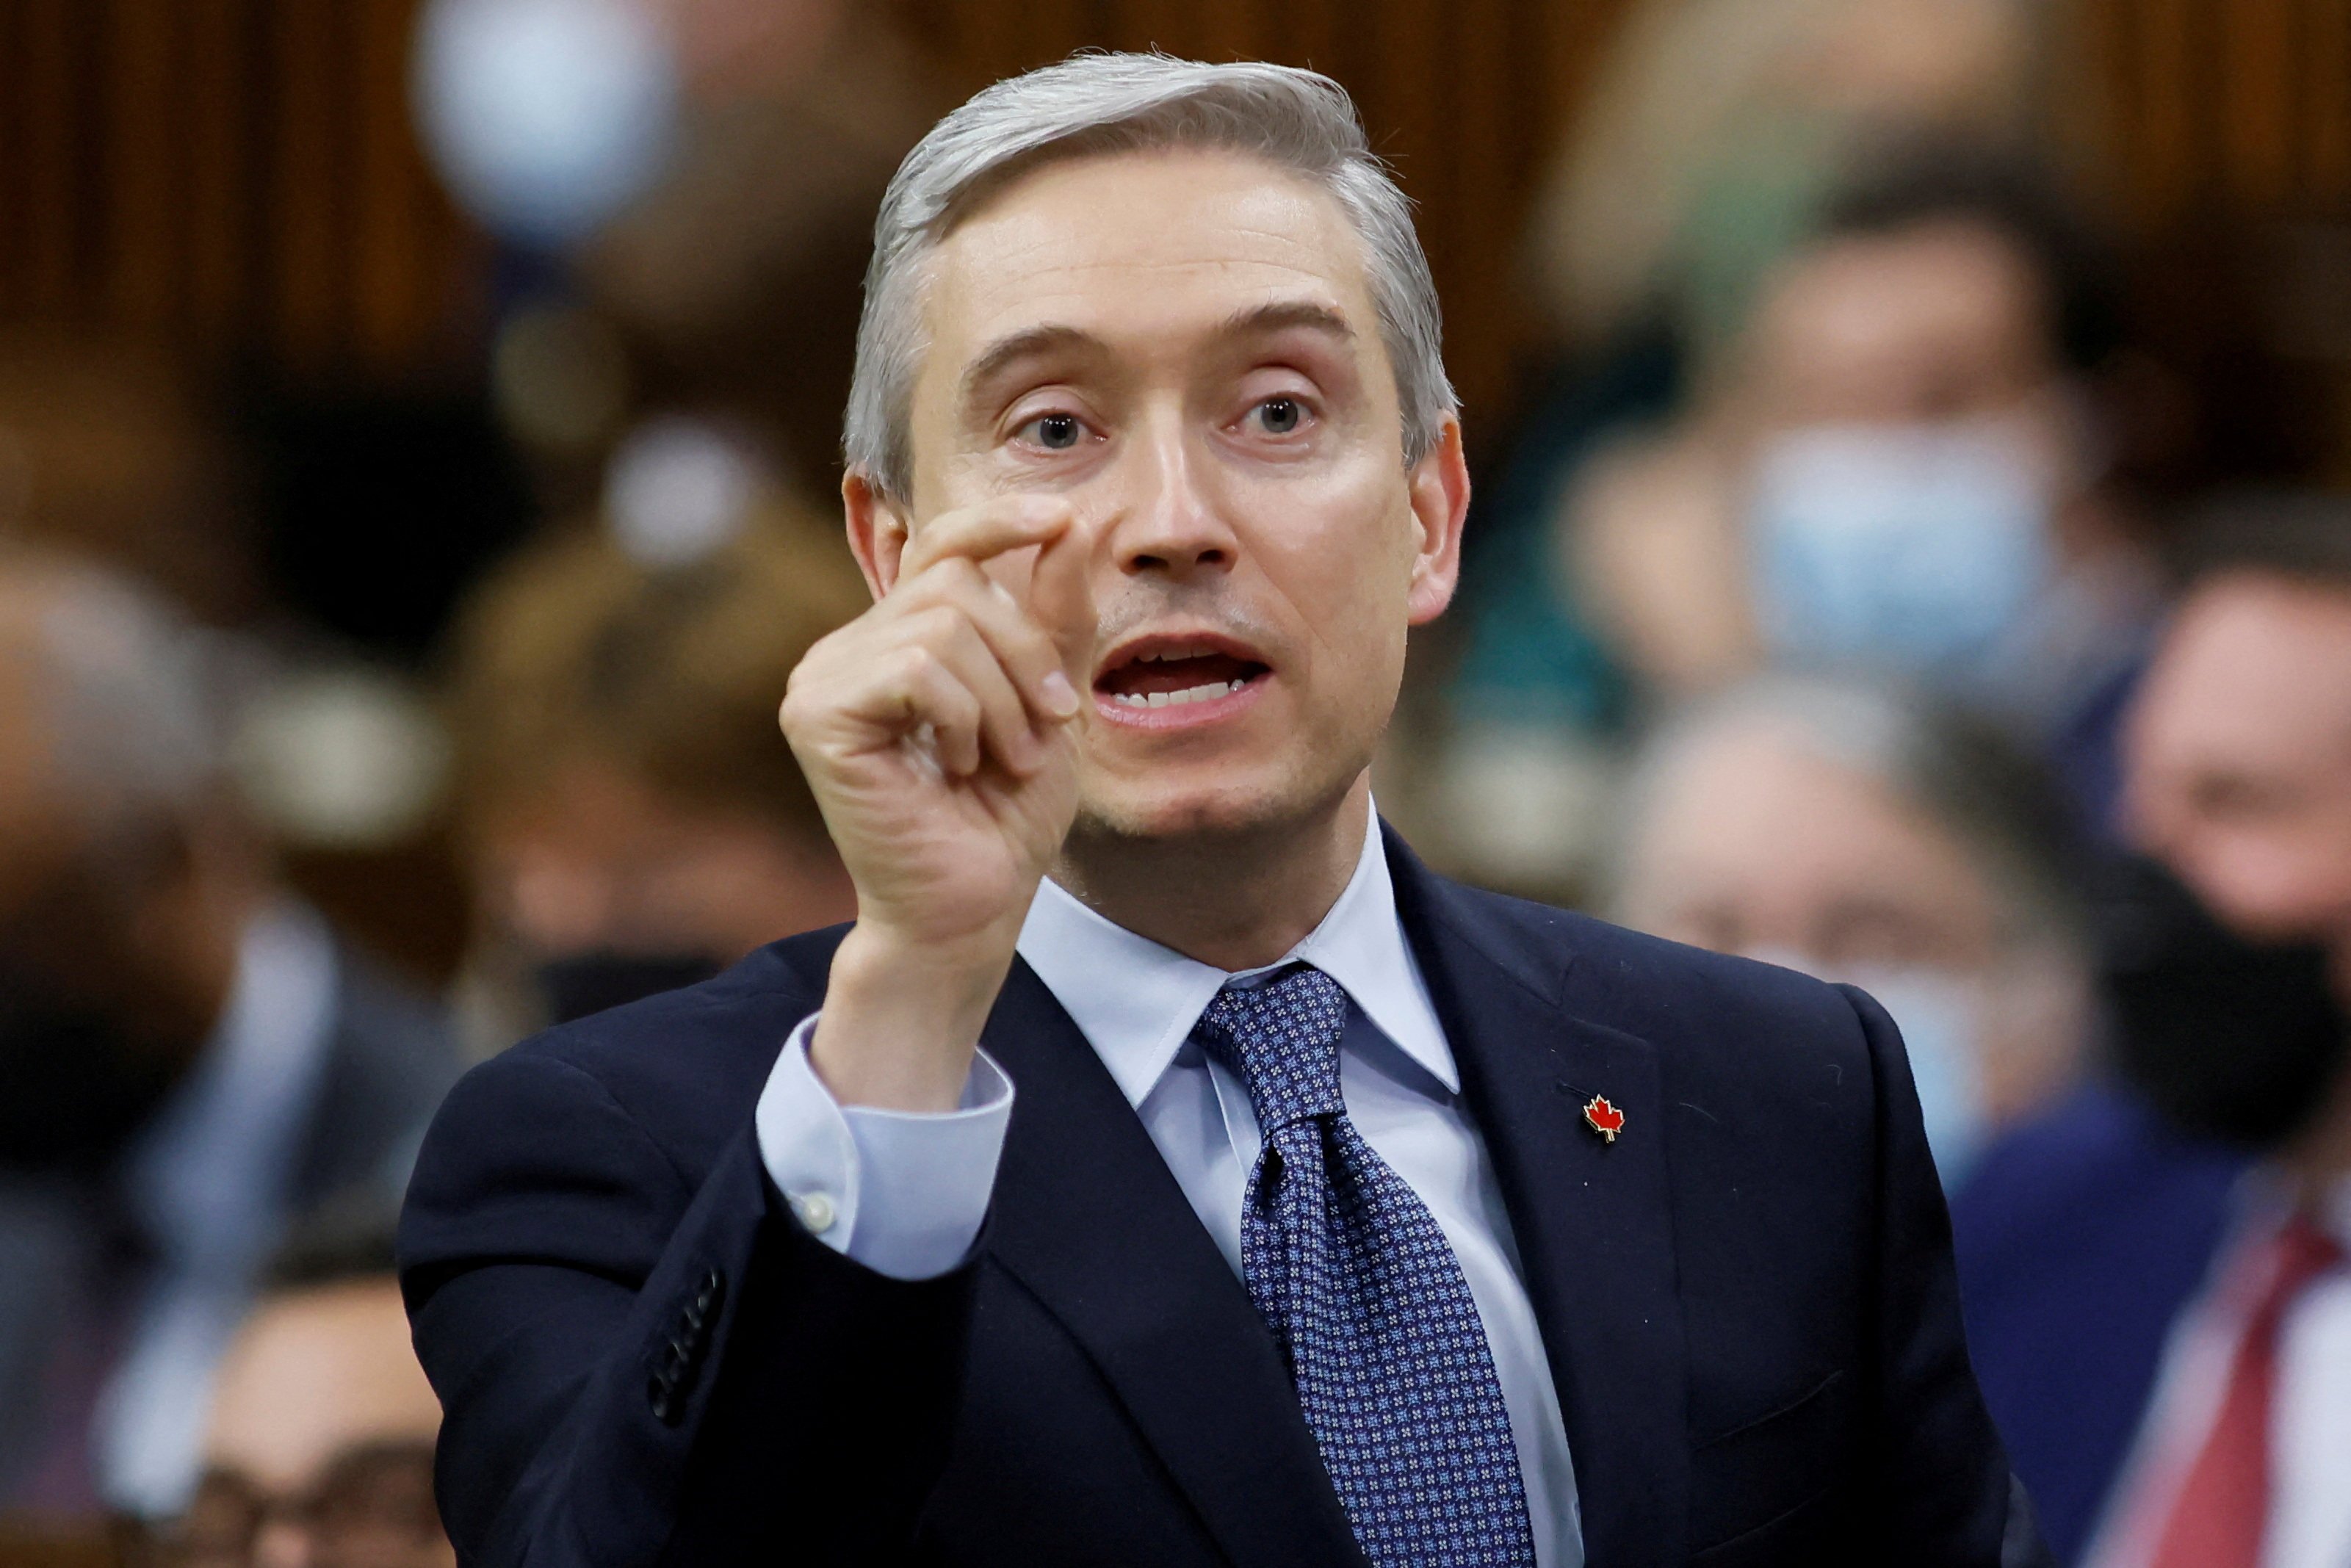 Canada’s Minister of Innovation, Science and Industry Francois-Philippe Champagne speaks at the House of Commons on Parliament Hill in Ottawa in April. Photo: Reuters